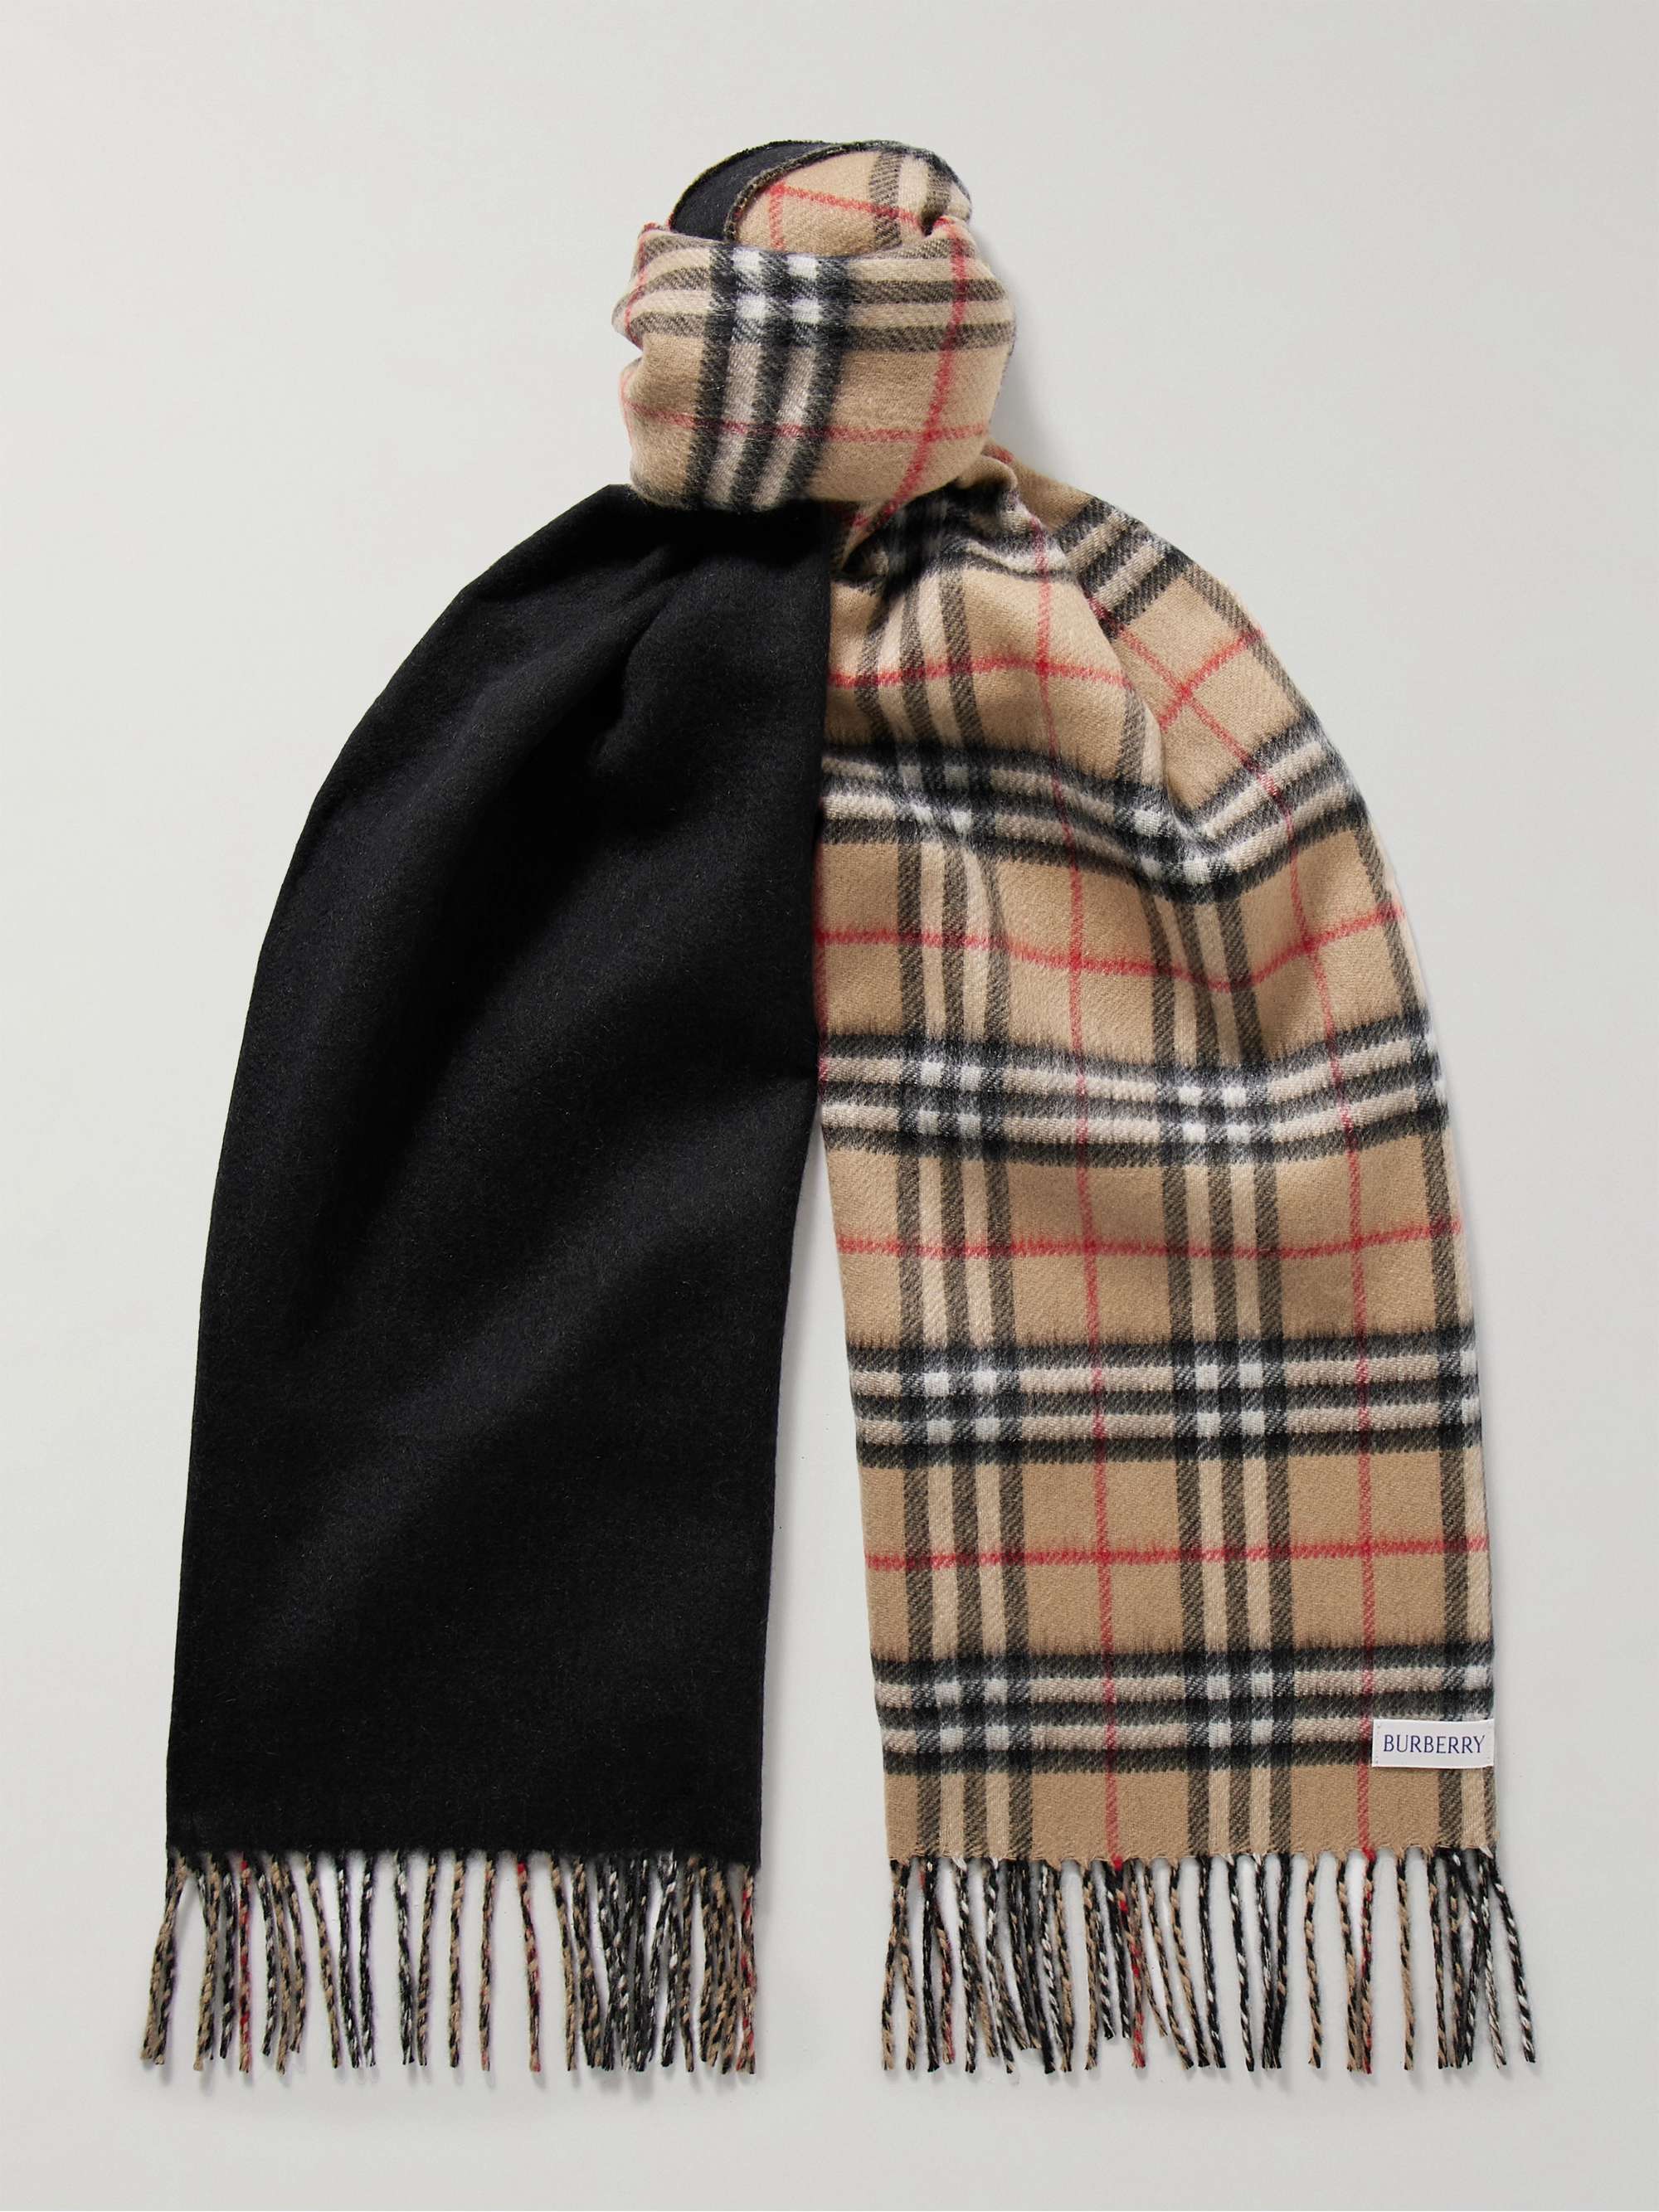 BURBERRY Reversible Fringed Checked Cashmere Scarf,Black